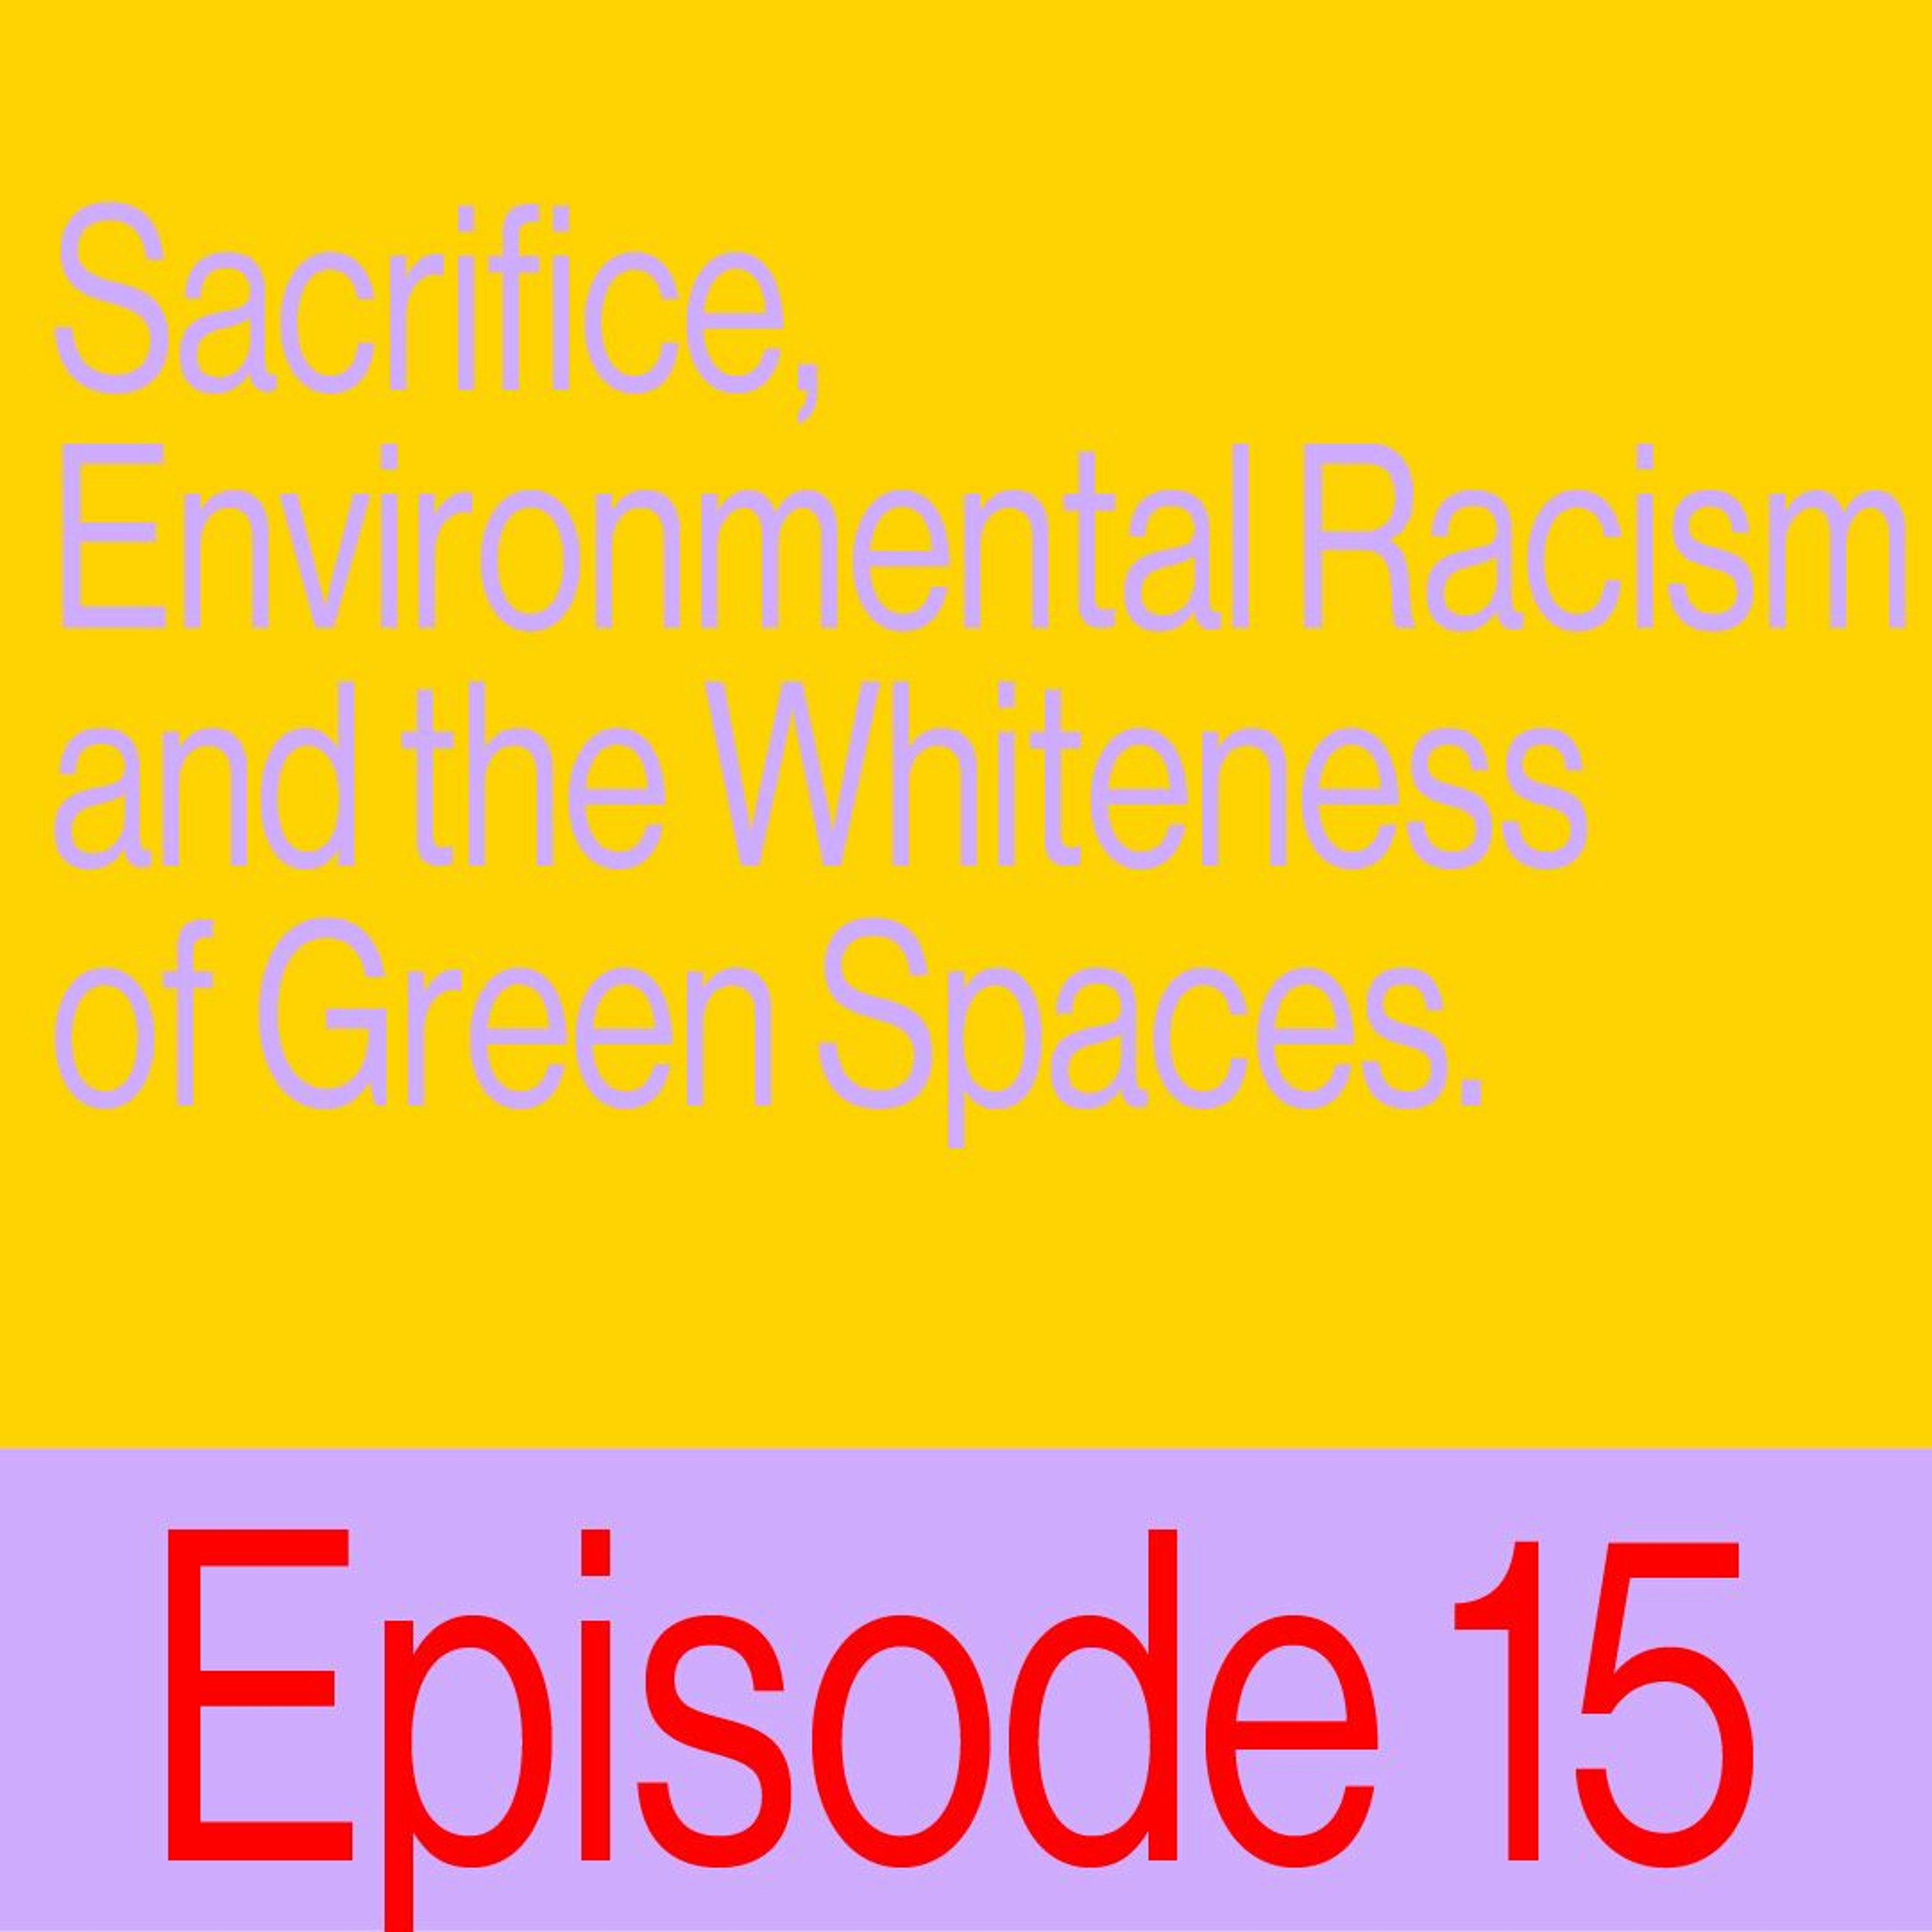 Episode 15: Sacrifice, Environmental Racism, And The Whiteness Of Green Spaces